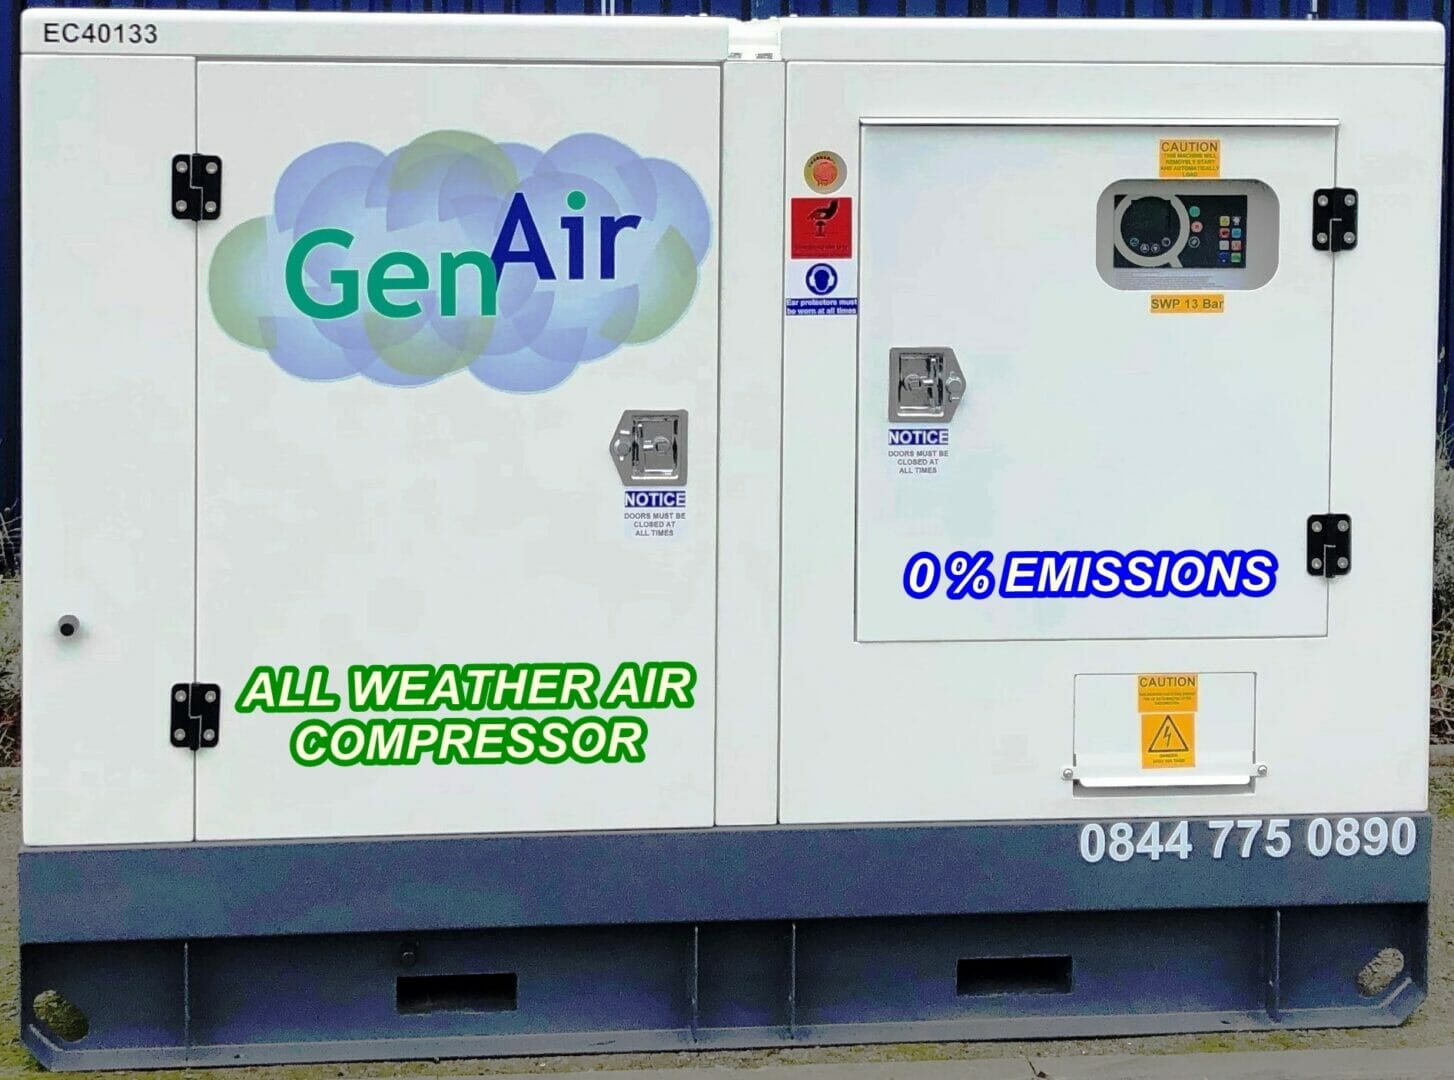 GenAir are set for a Green Apple Award for their All Weather All Electric Air Compressor   @GenAirUK